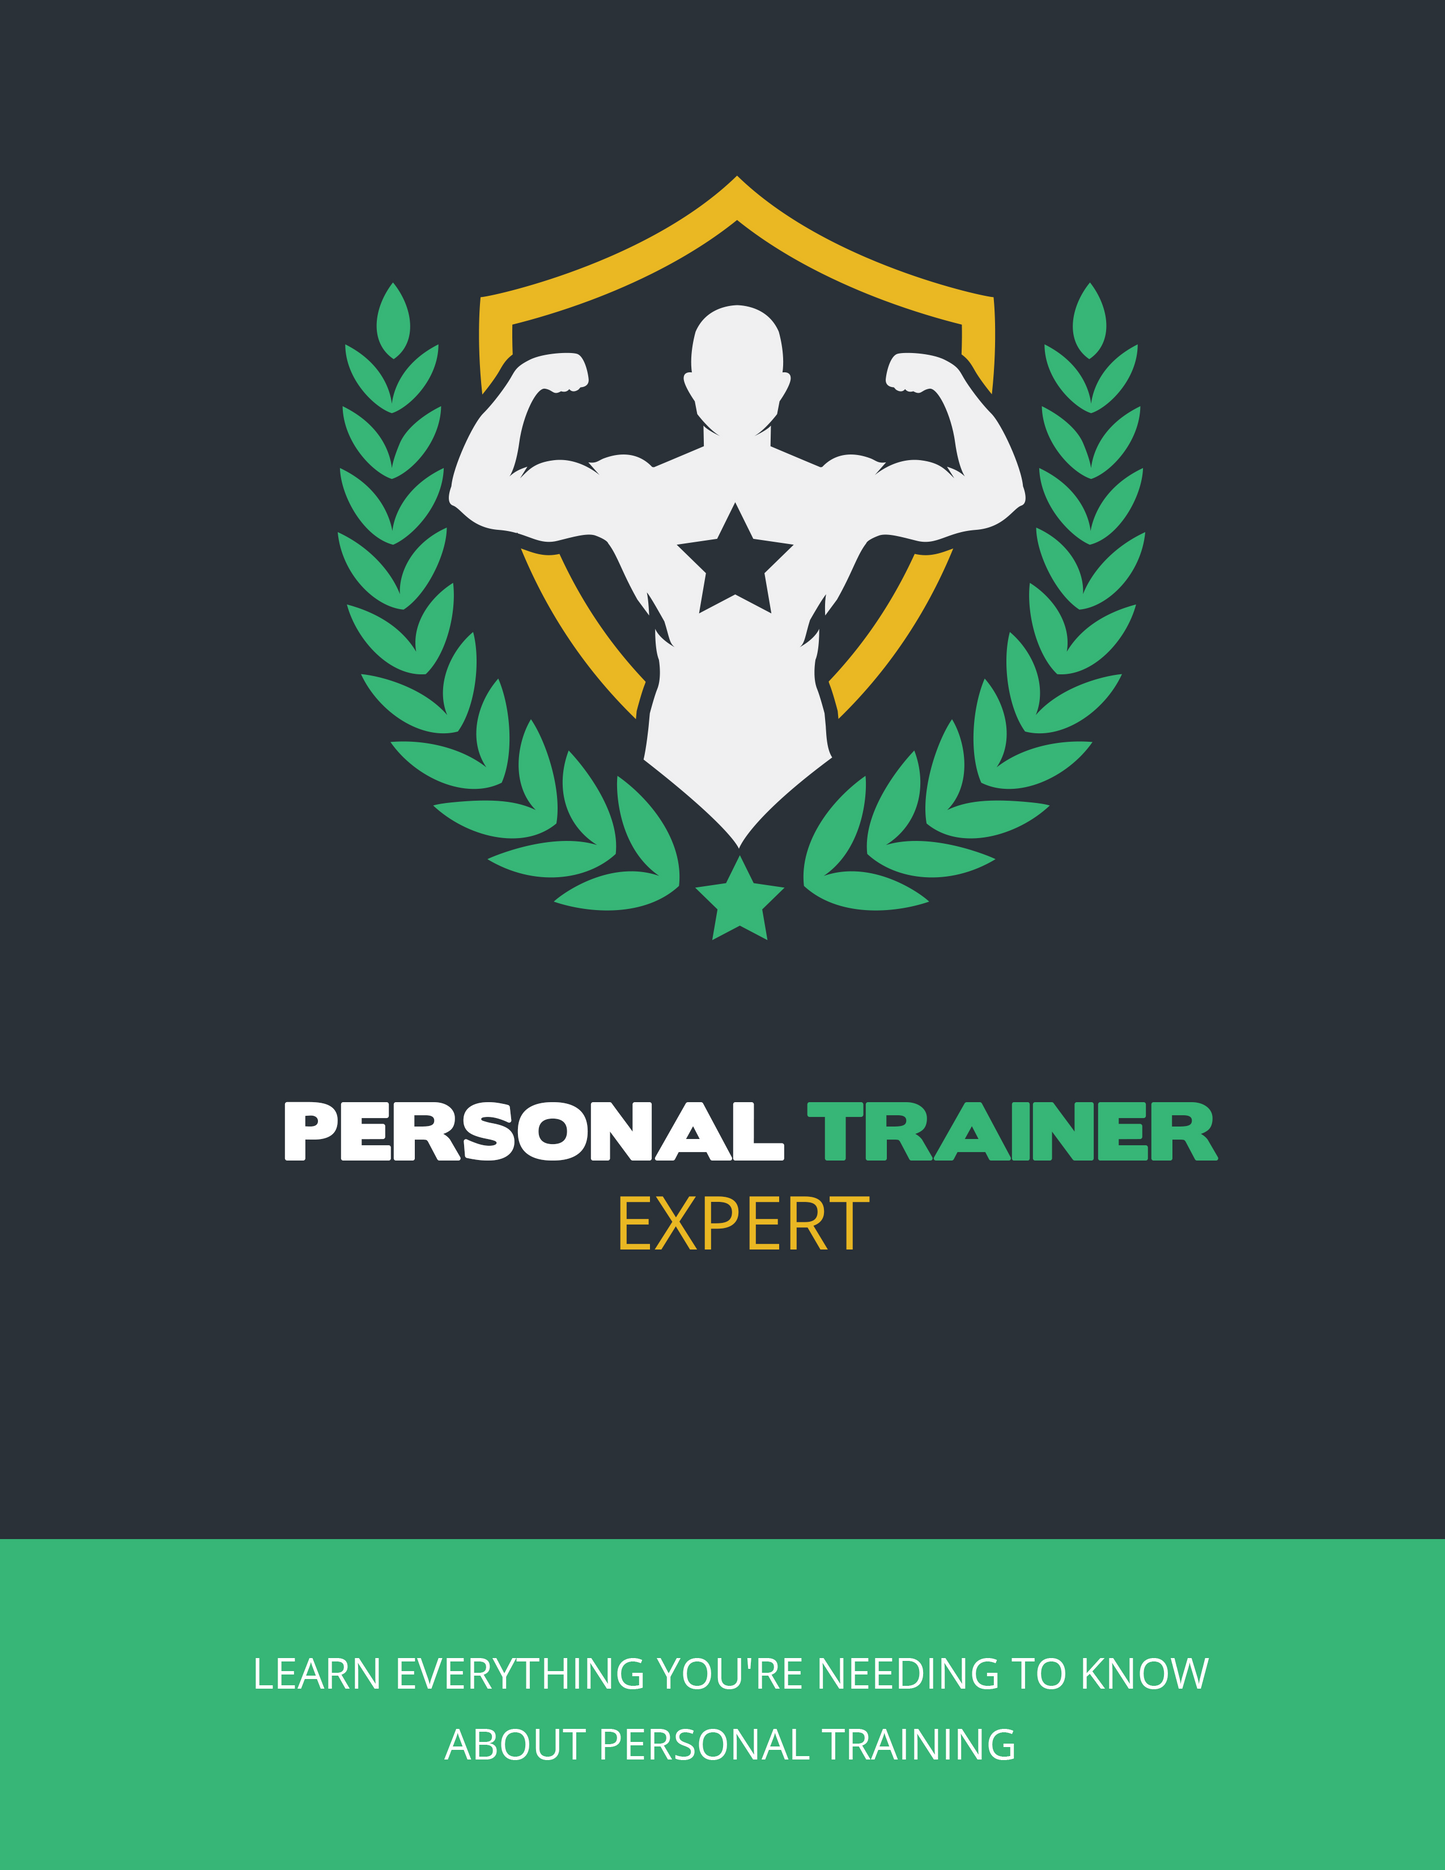 Mastering Fitness: Your Ultimate Guide to Becoming a Personal Trainer Expert